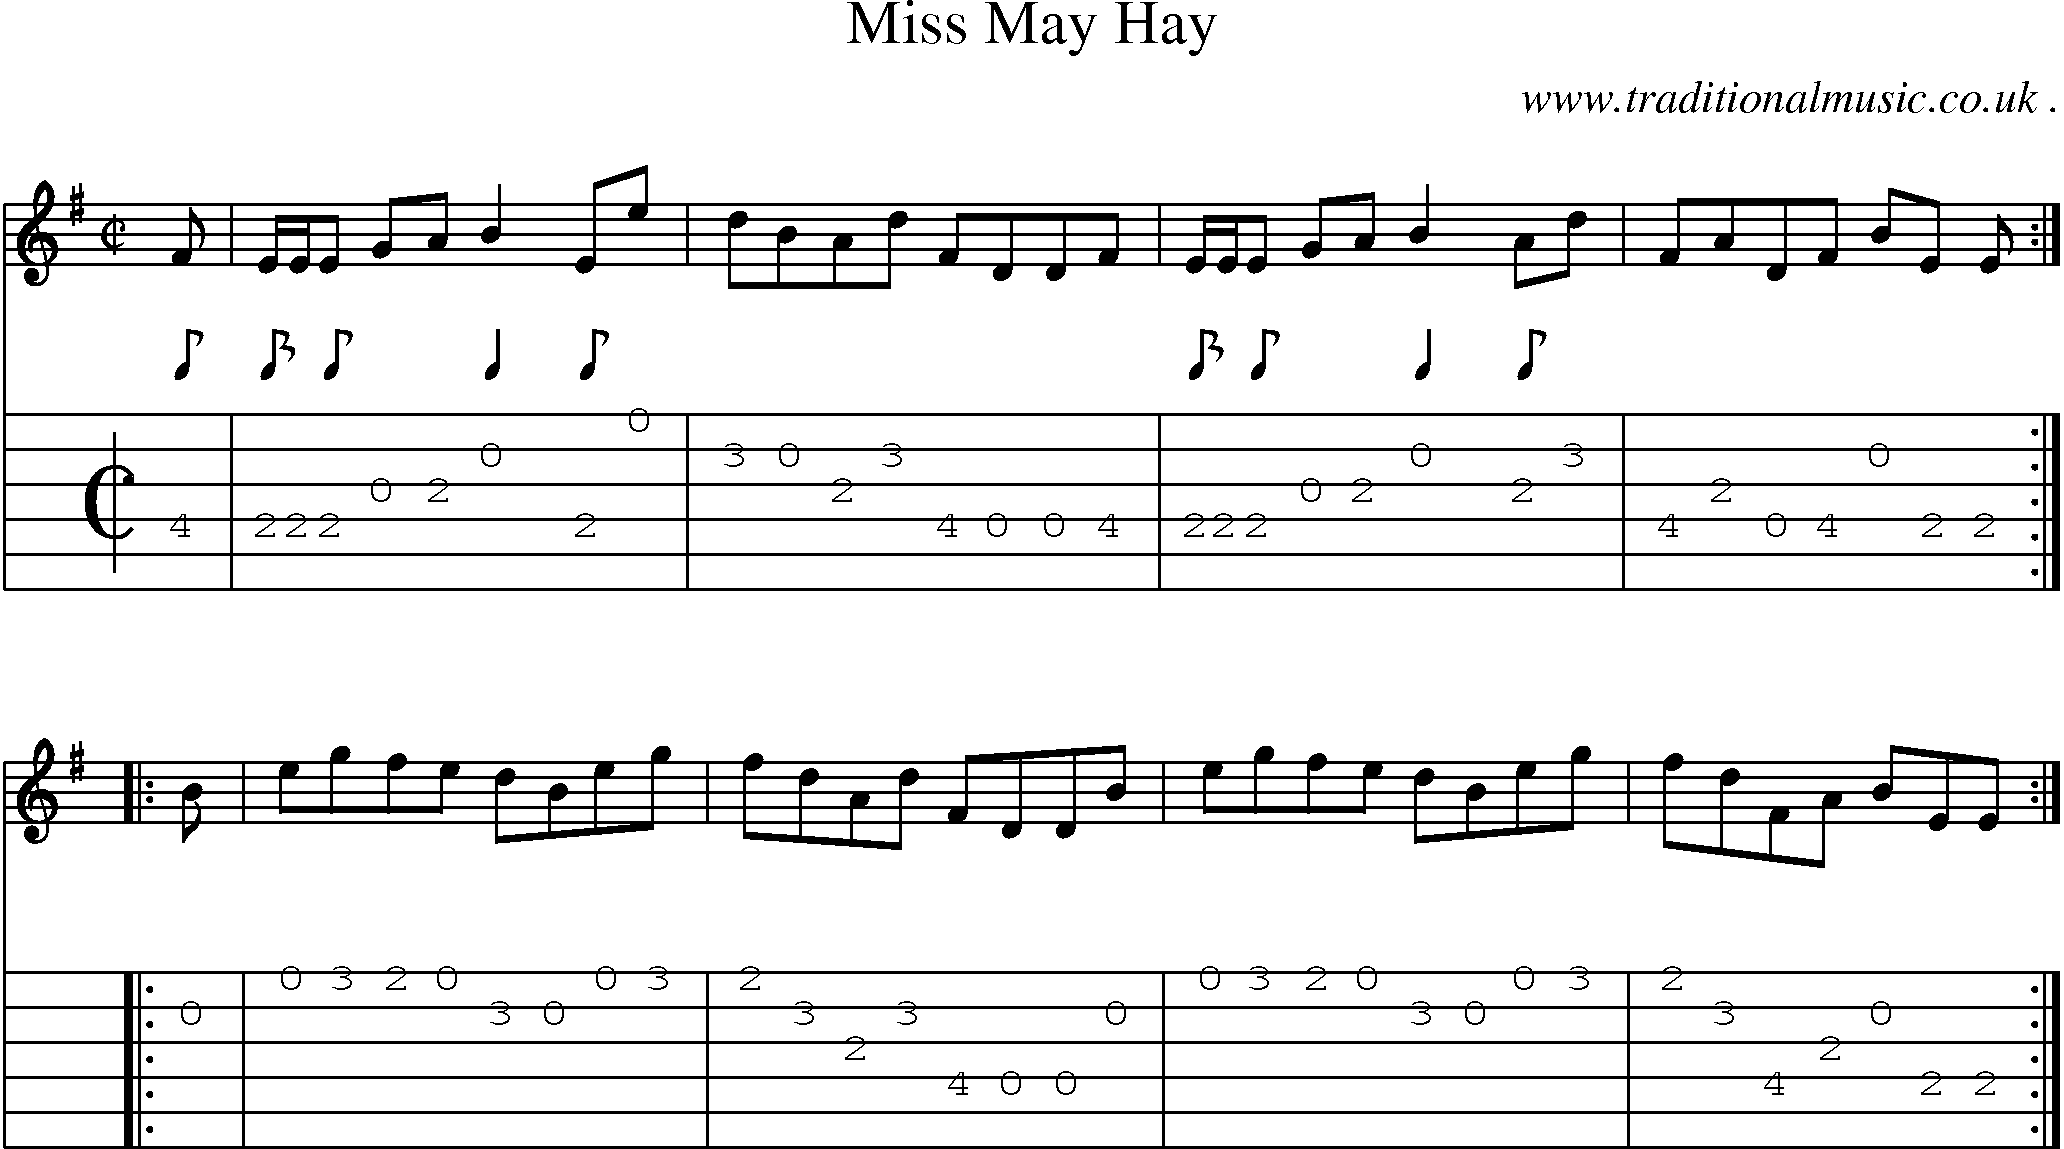 Sheet-music  score, Chords and Guitar Tabs for Miss May Hay